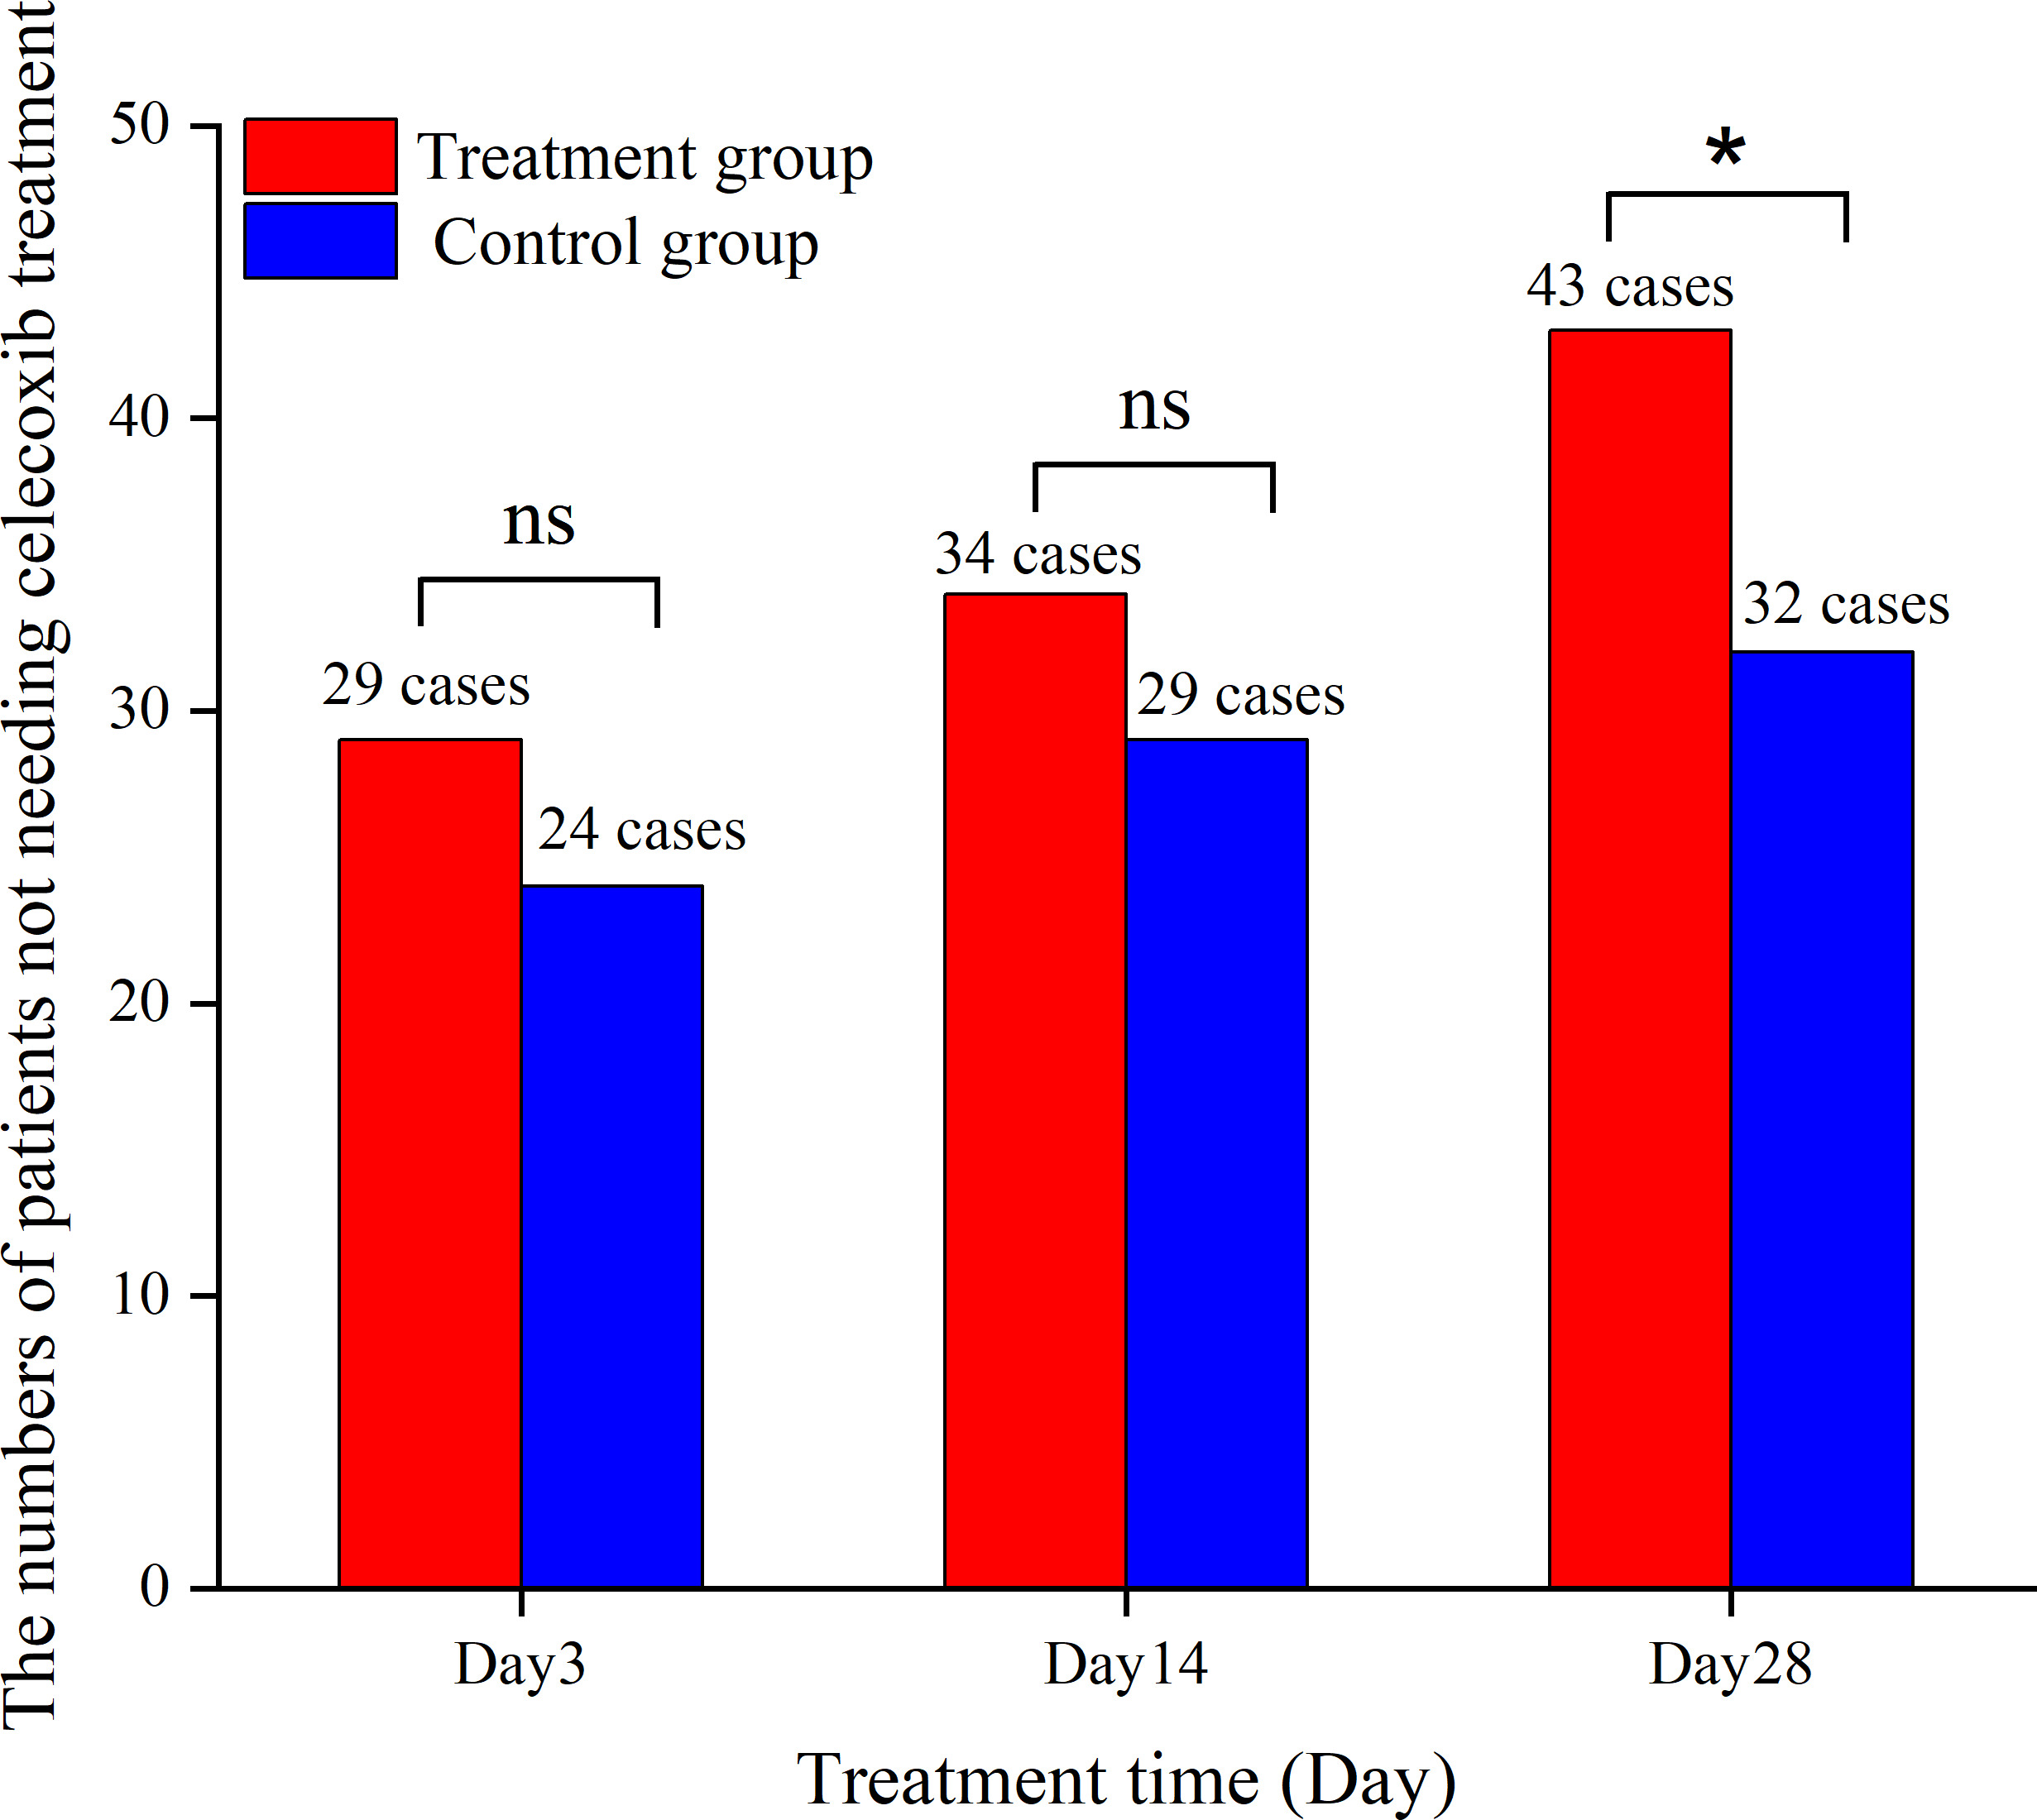 The numbers of patients not requiring celecoxib treatment in both treatment group and control group. χ2 test was applied for the statistical analysis of the numbers of patients in both groups. P*< 0.05 represents a statistical difference of the patients’ numbers between treatment group and control group, while ‘ns’ represents no significance between the two groups.